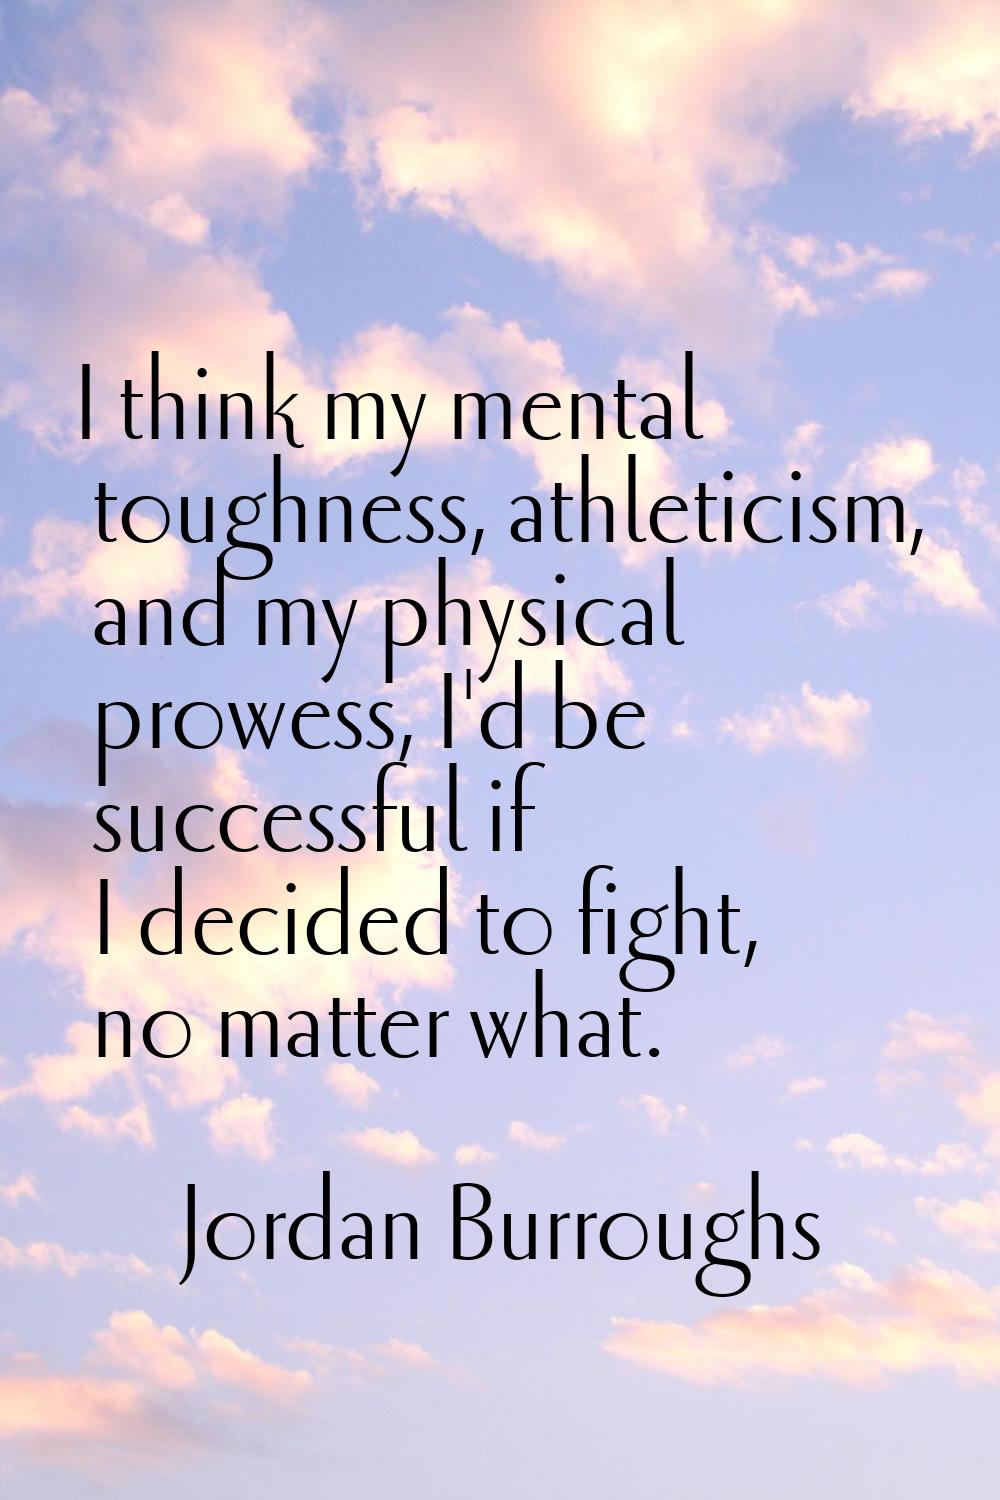 I think my mental toughness, athleticism, and my physical prowess, I'd be successful if I decided t